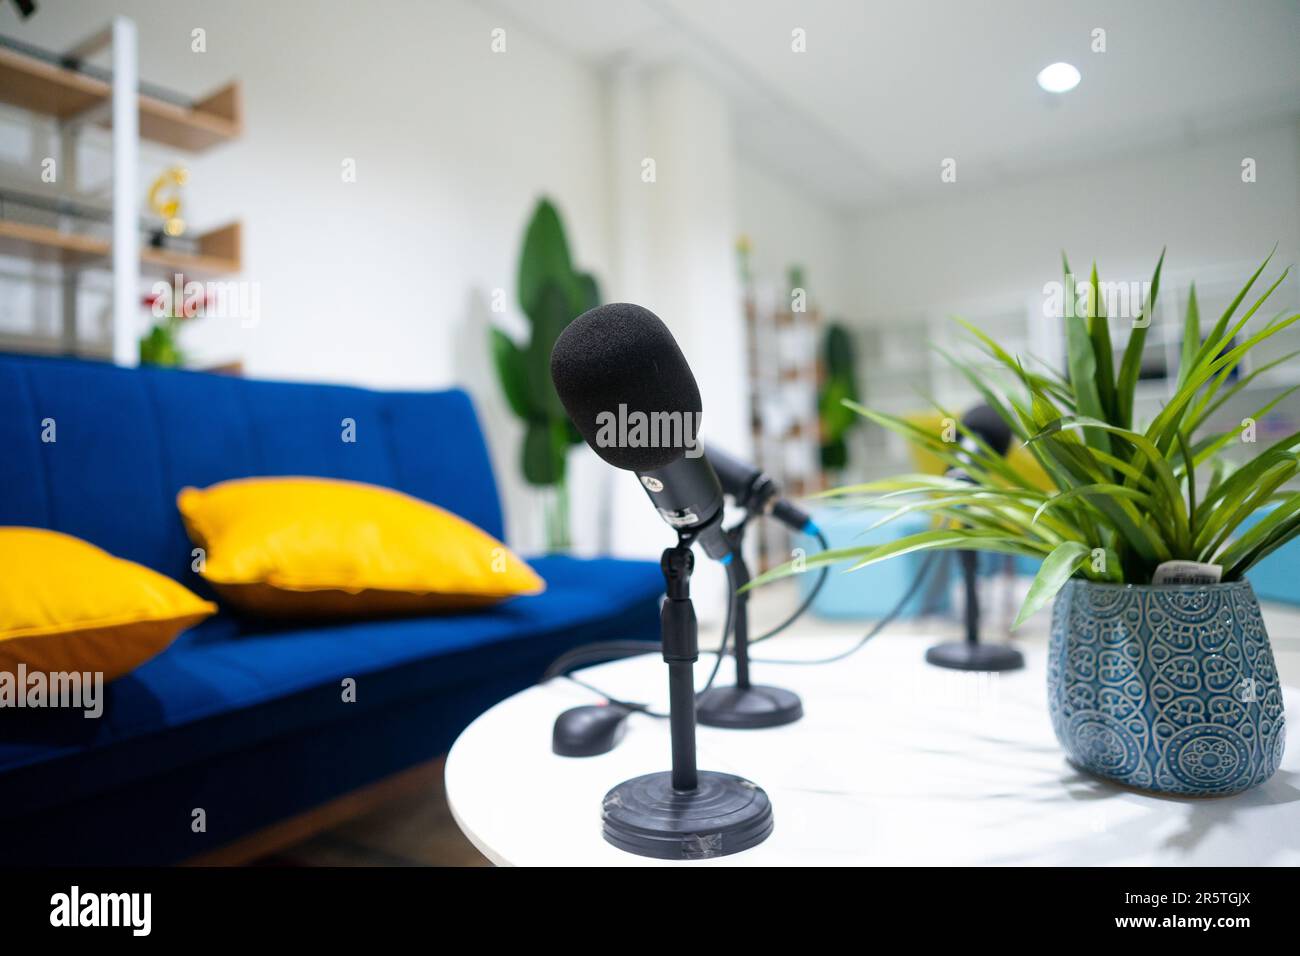 Simple studio room with blue chairs. Podcast media studio to broadcast audio. Audio settings for podcasting, microphone, speech, or interview. Stock Photo